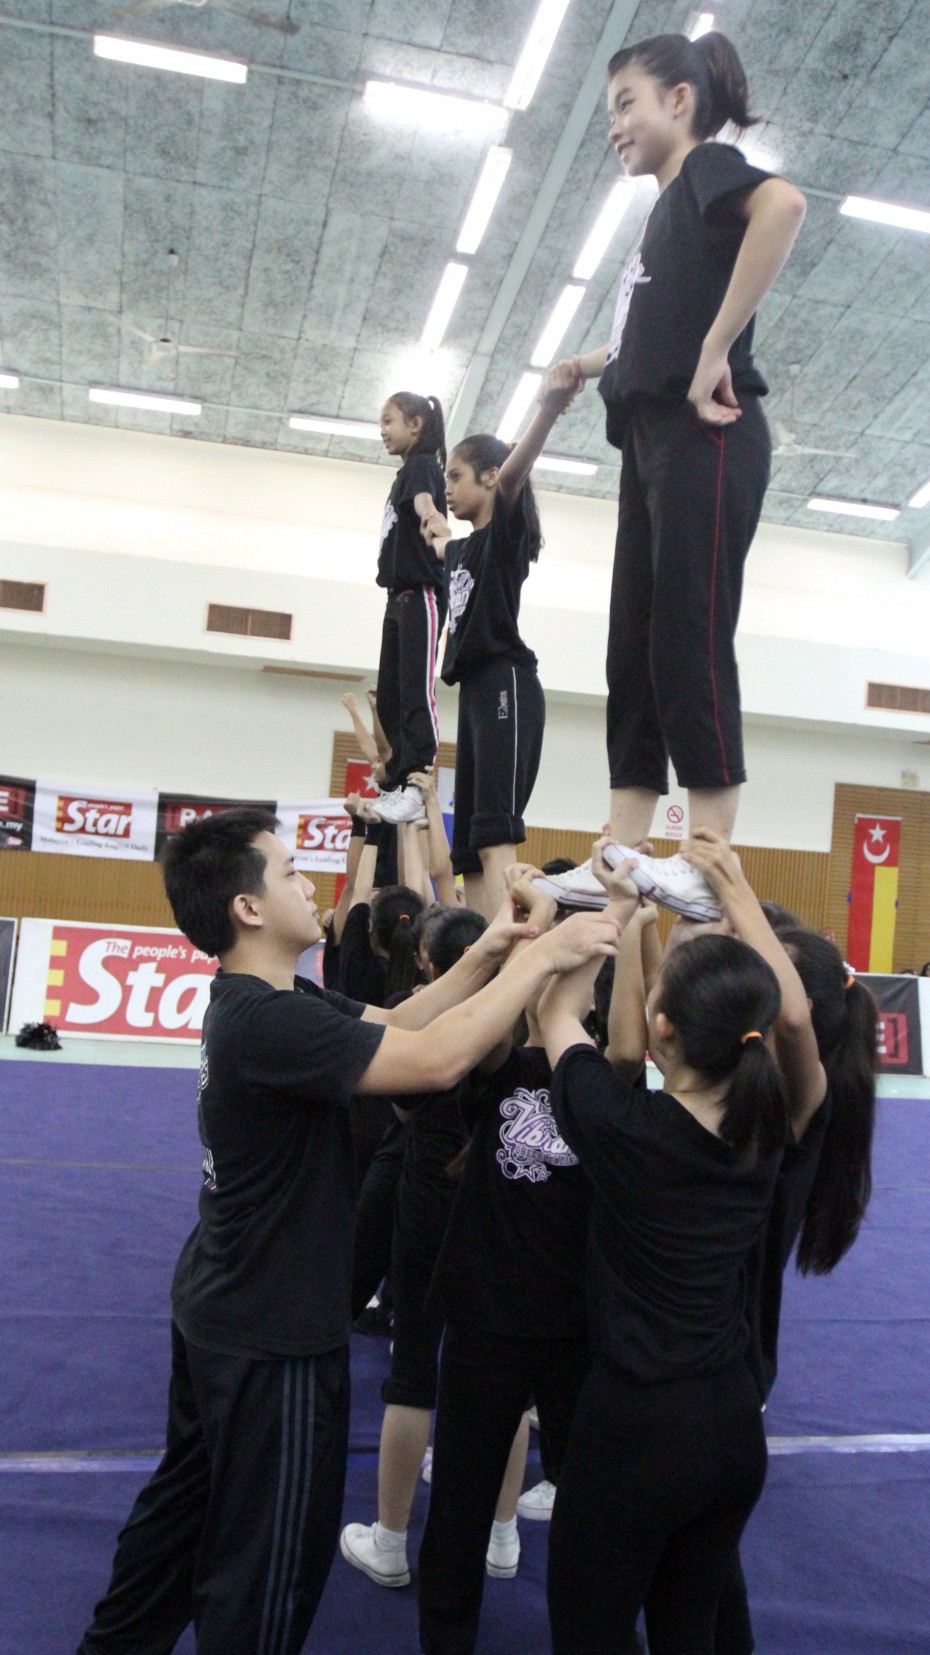 Vibrant Junior coach, Eric Chee ensuring his team’s base is solid. Safety is always the top priority at CHEER.